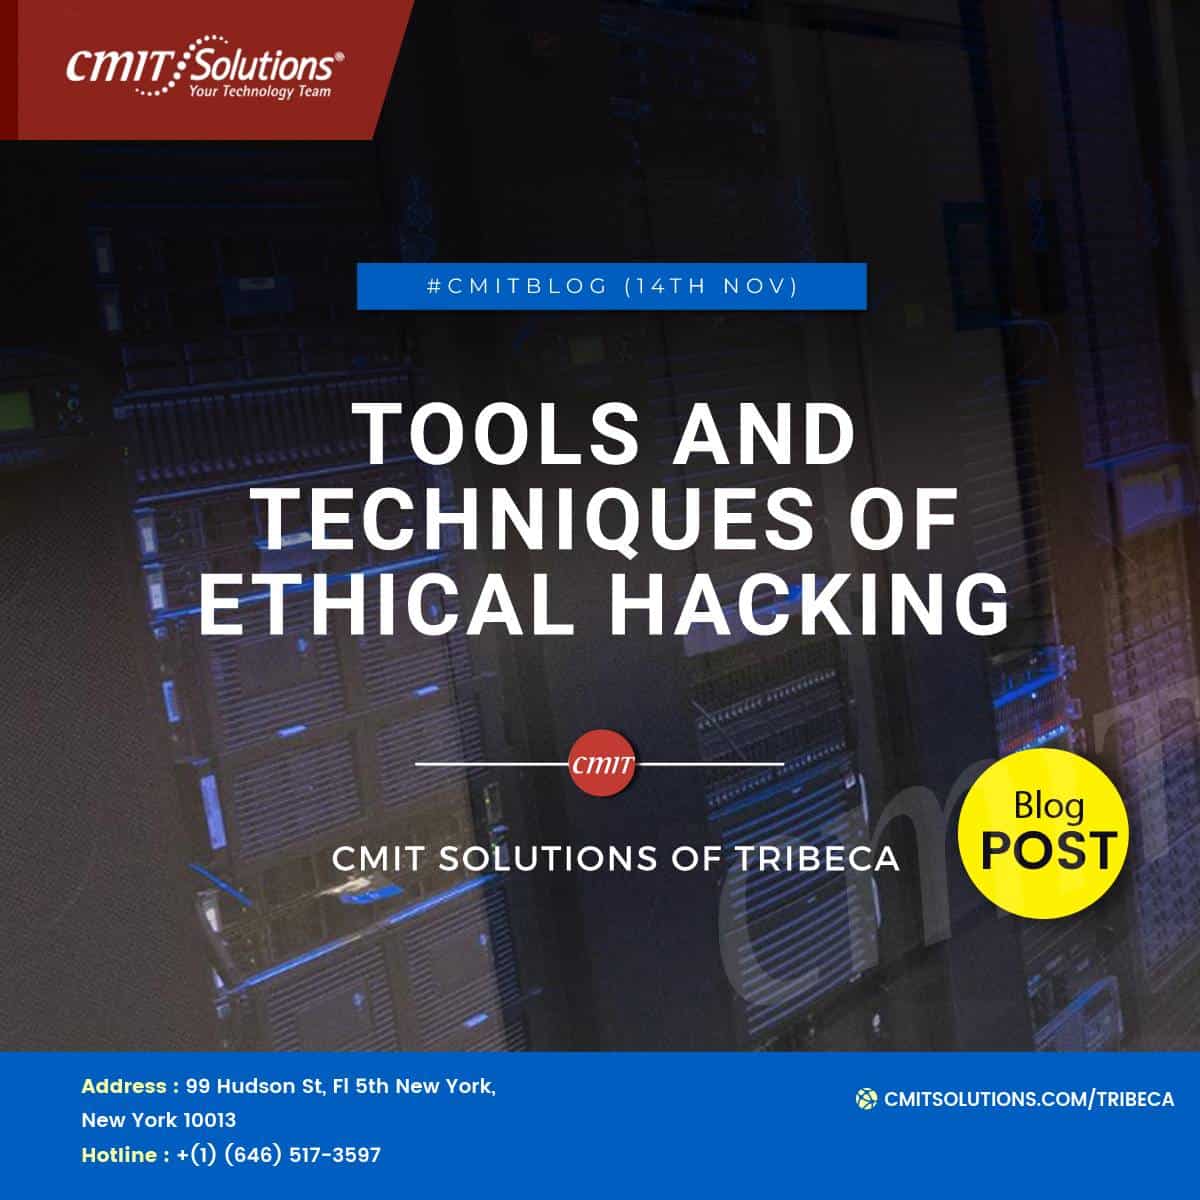 Top 7 Ethical Hacking Tools In 2024, Hacking & Cybersecurity Tools